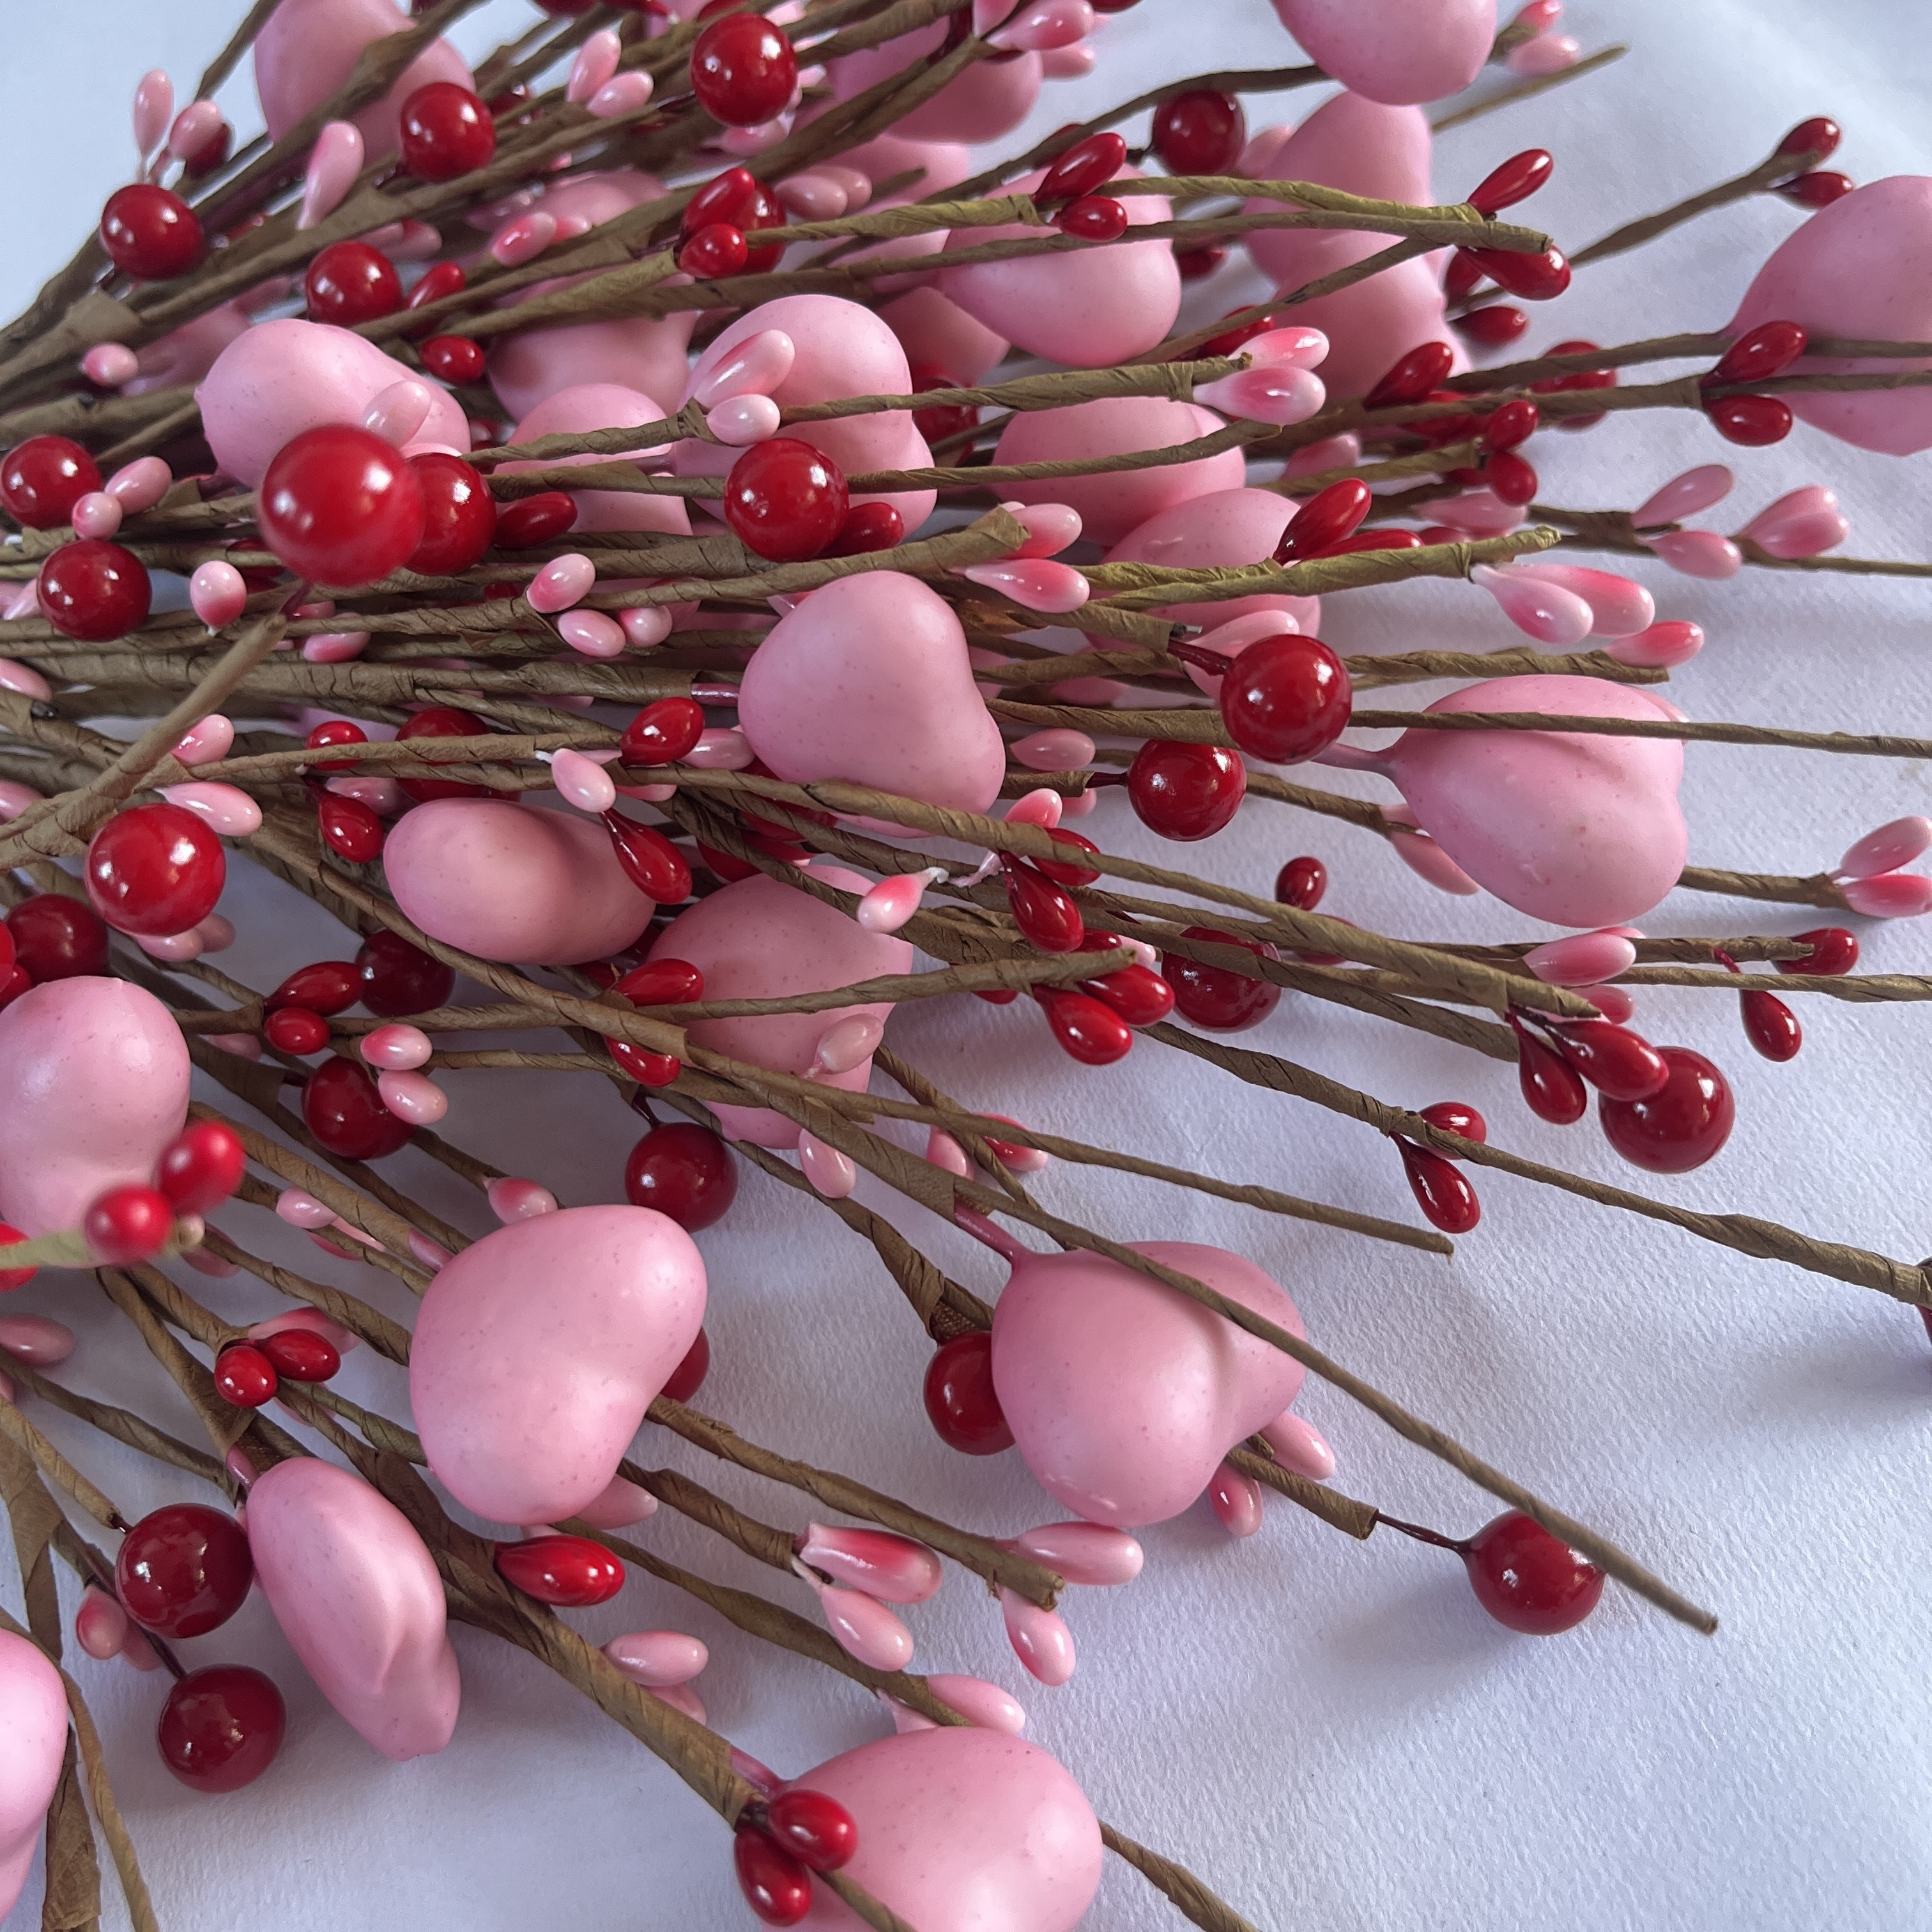 MELIUS 6 Pcs Valentine’s Berry Flower Stems, 14 Red Heart Shaped  Artificial Flowers Berry Branches for Valentine's Day Wedding Decor